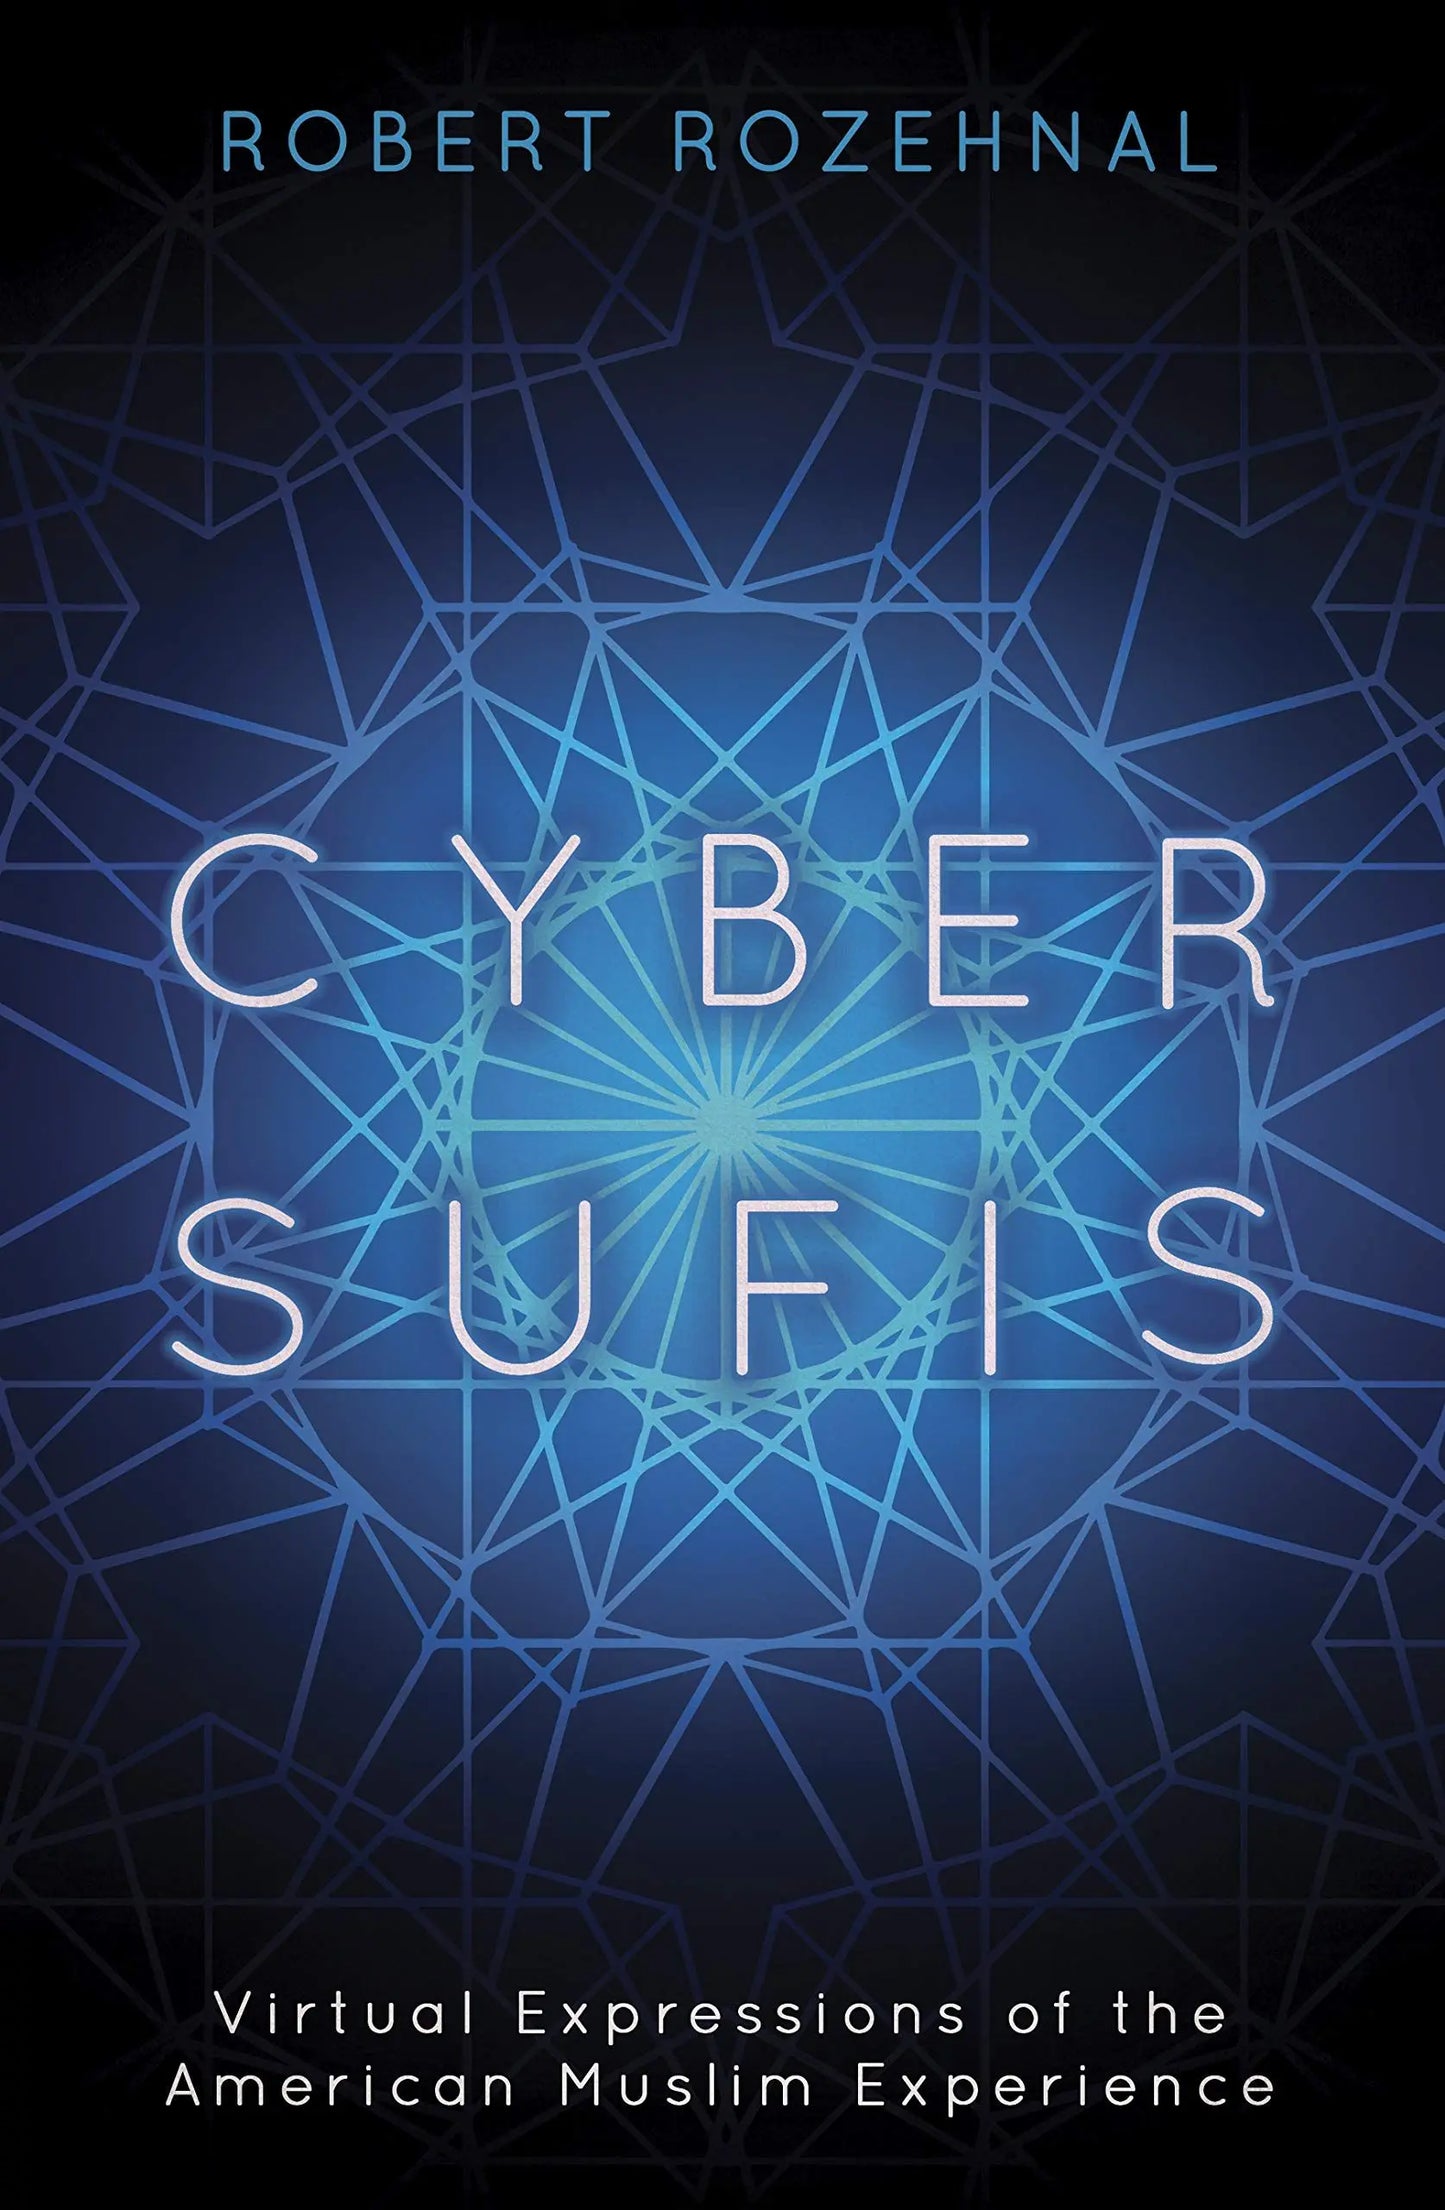 Cyber Sufis: Virtual Expressions of the American Muslim Experience